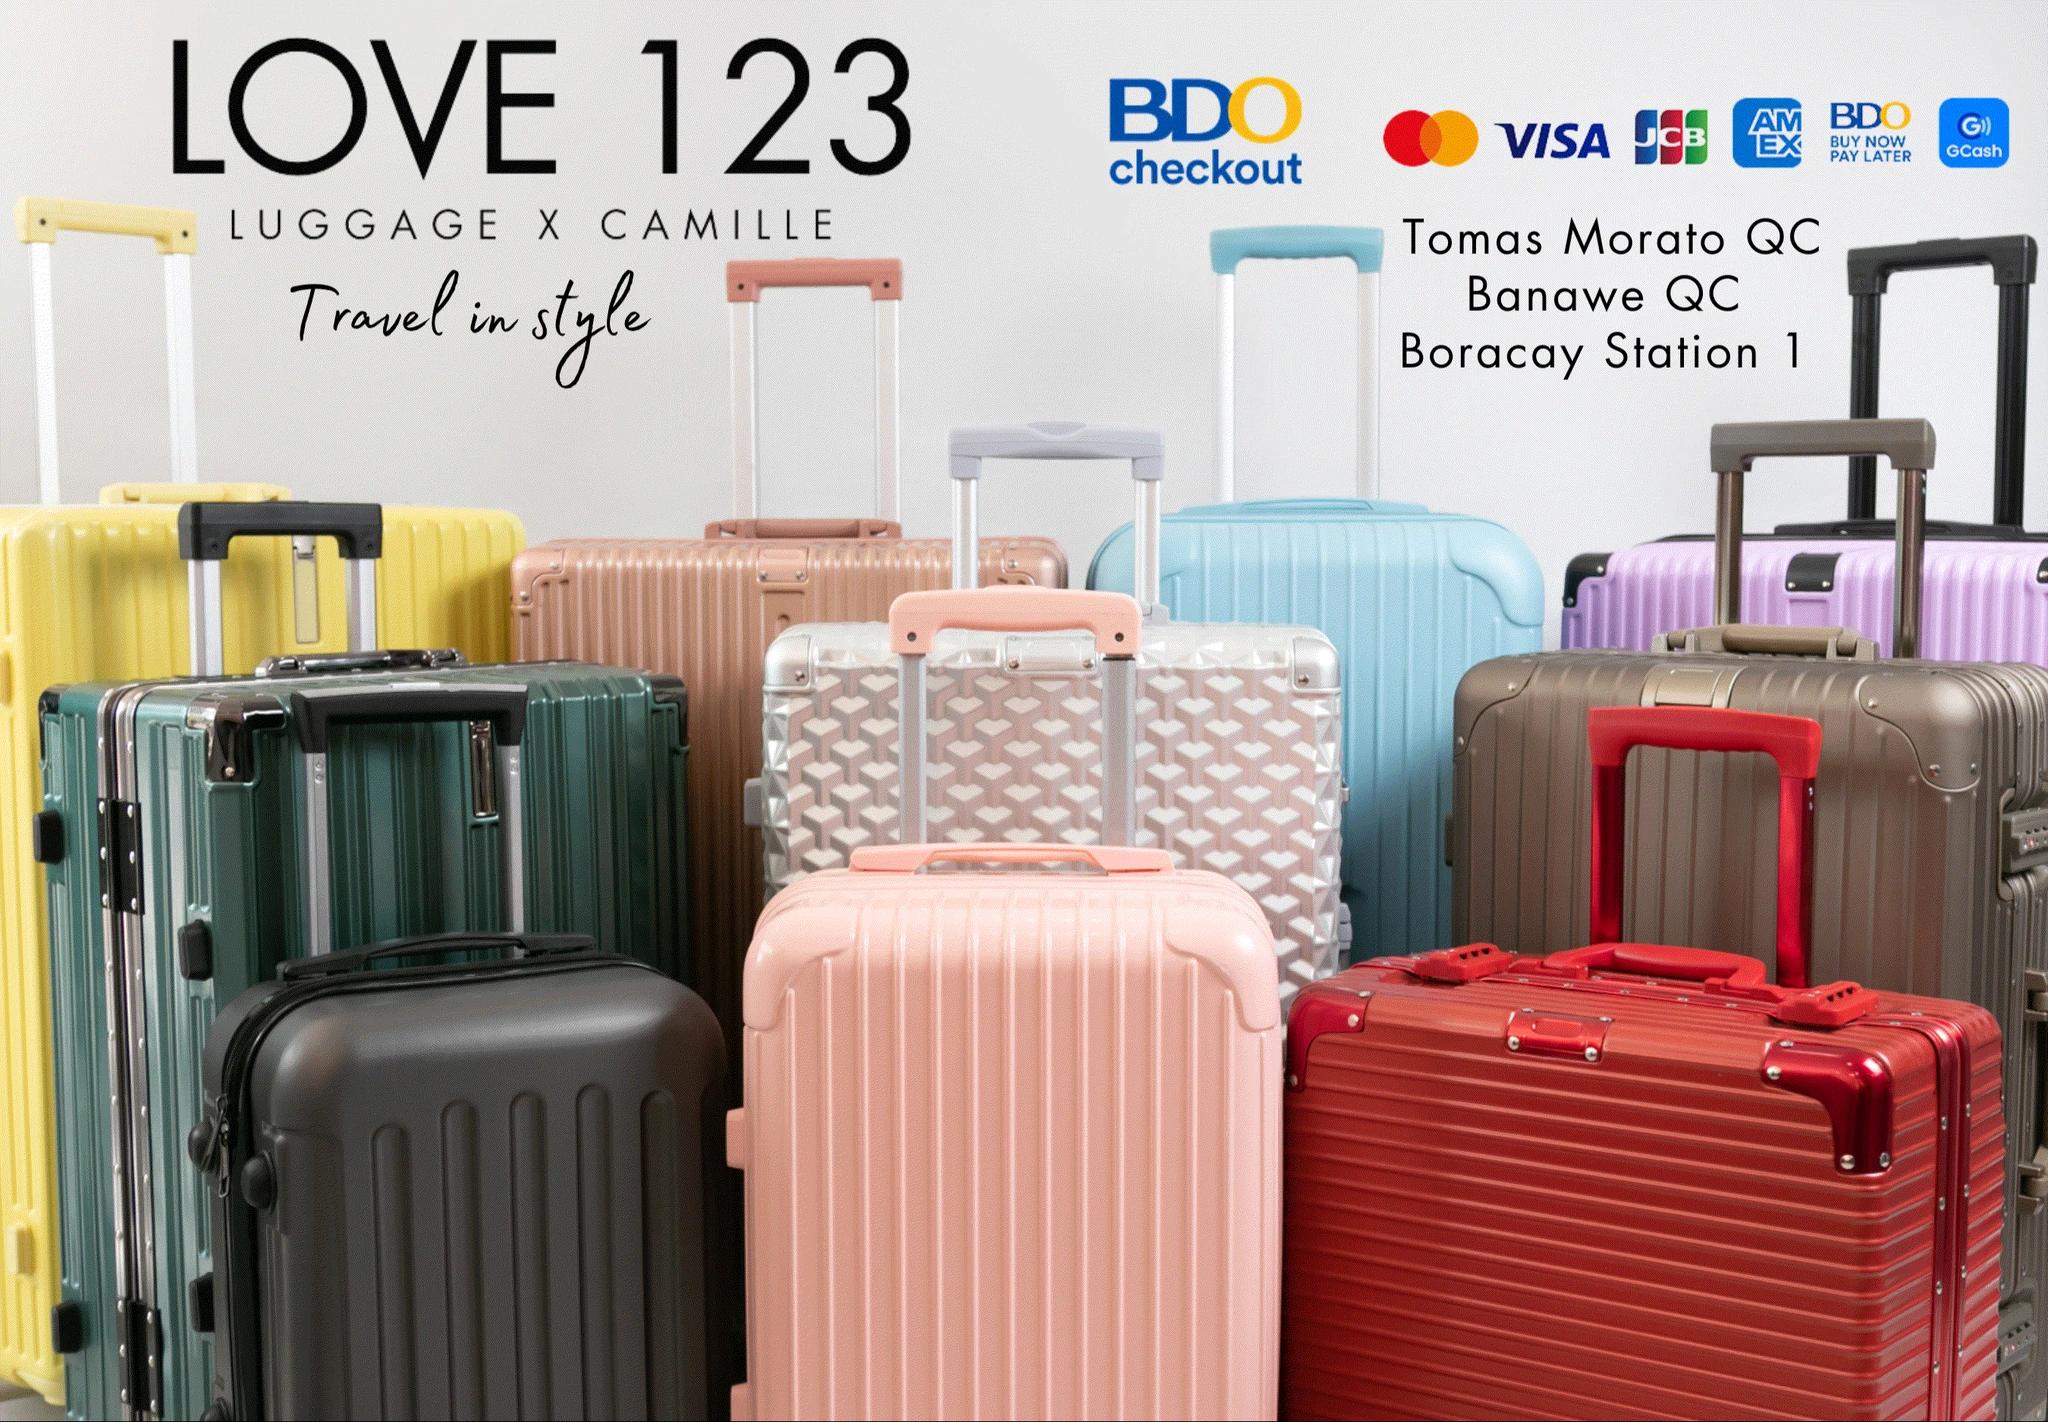 Love123 Luggage x Camille